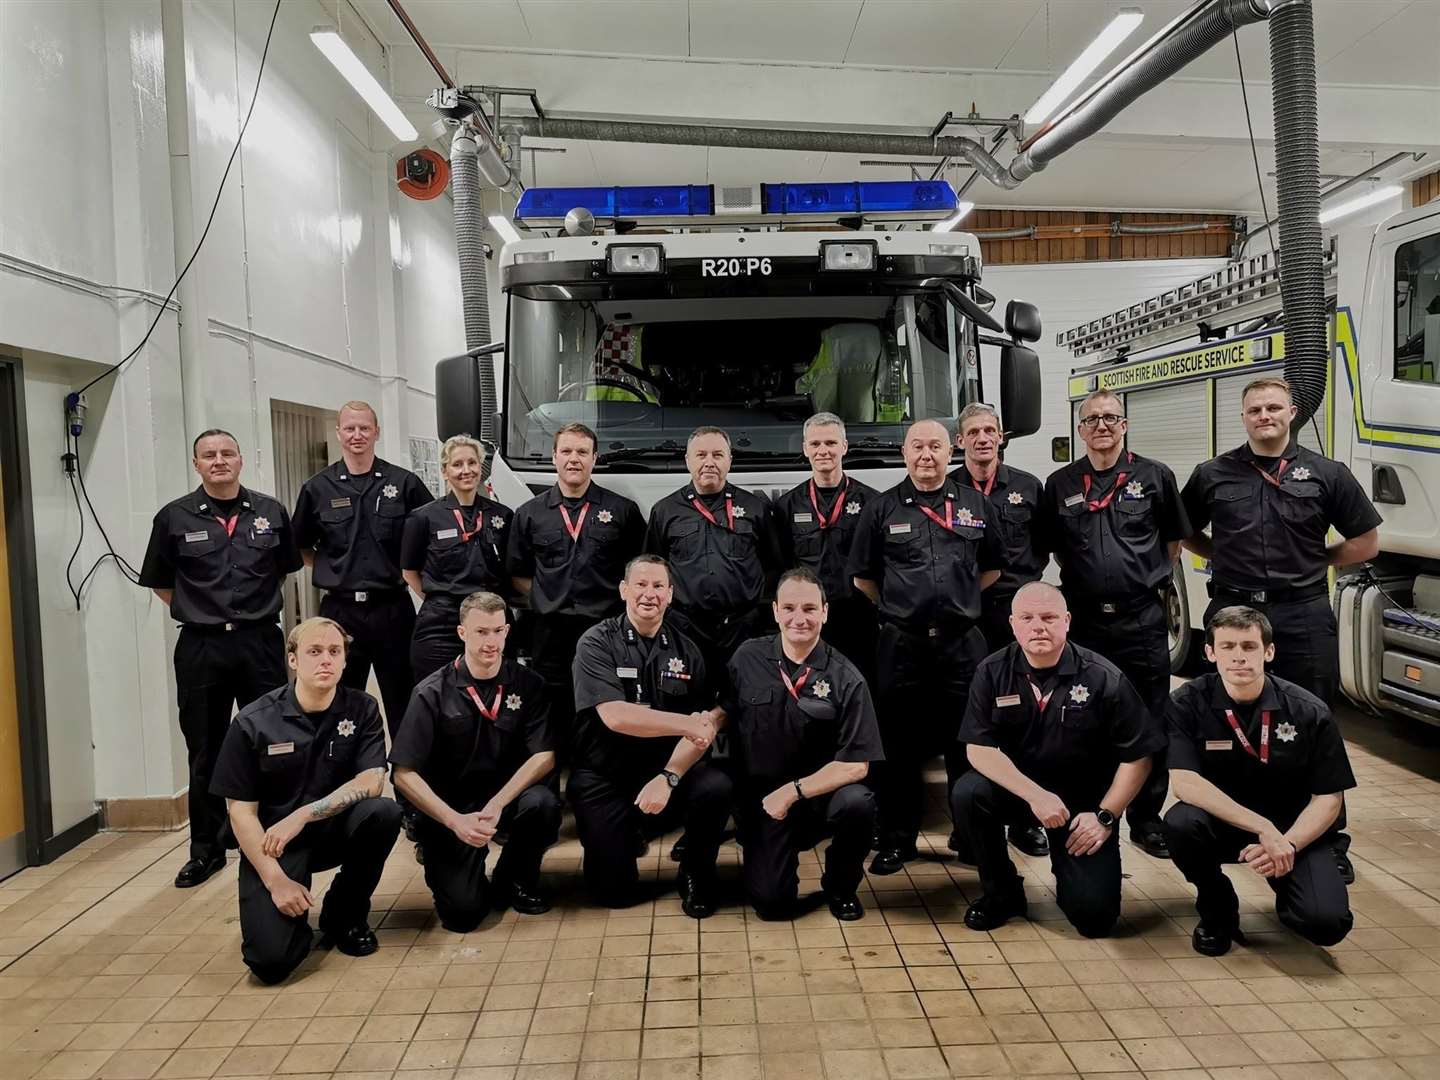 The crew at Forres Community Fire Station.